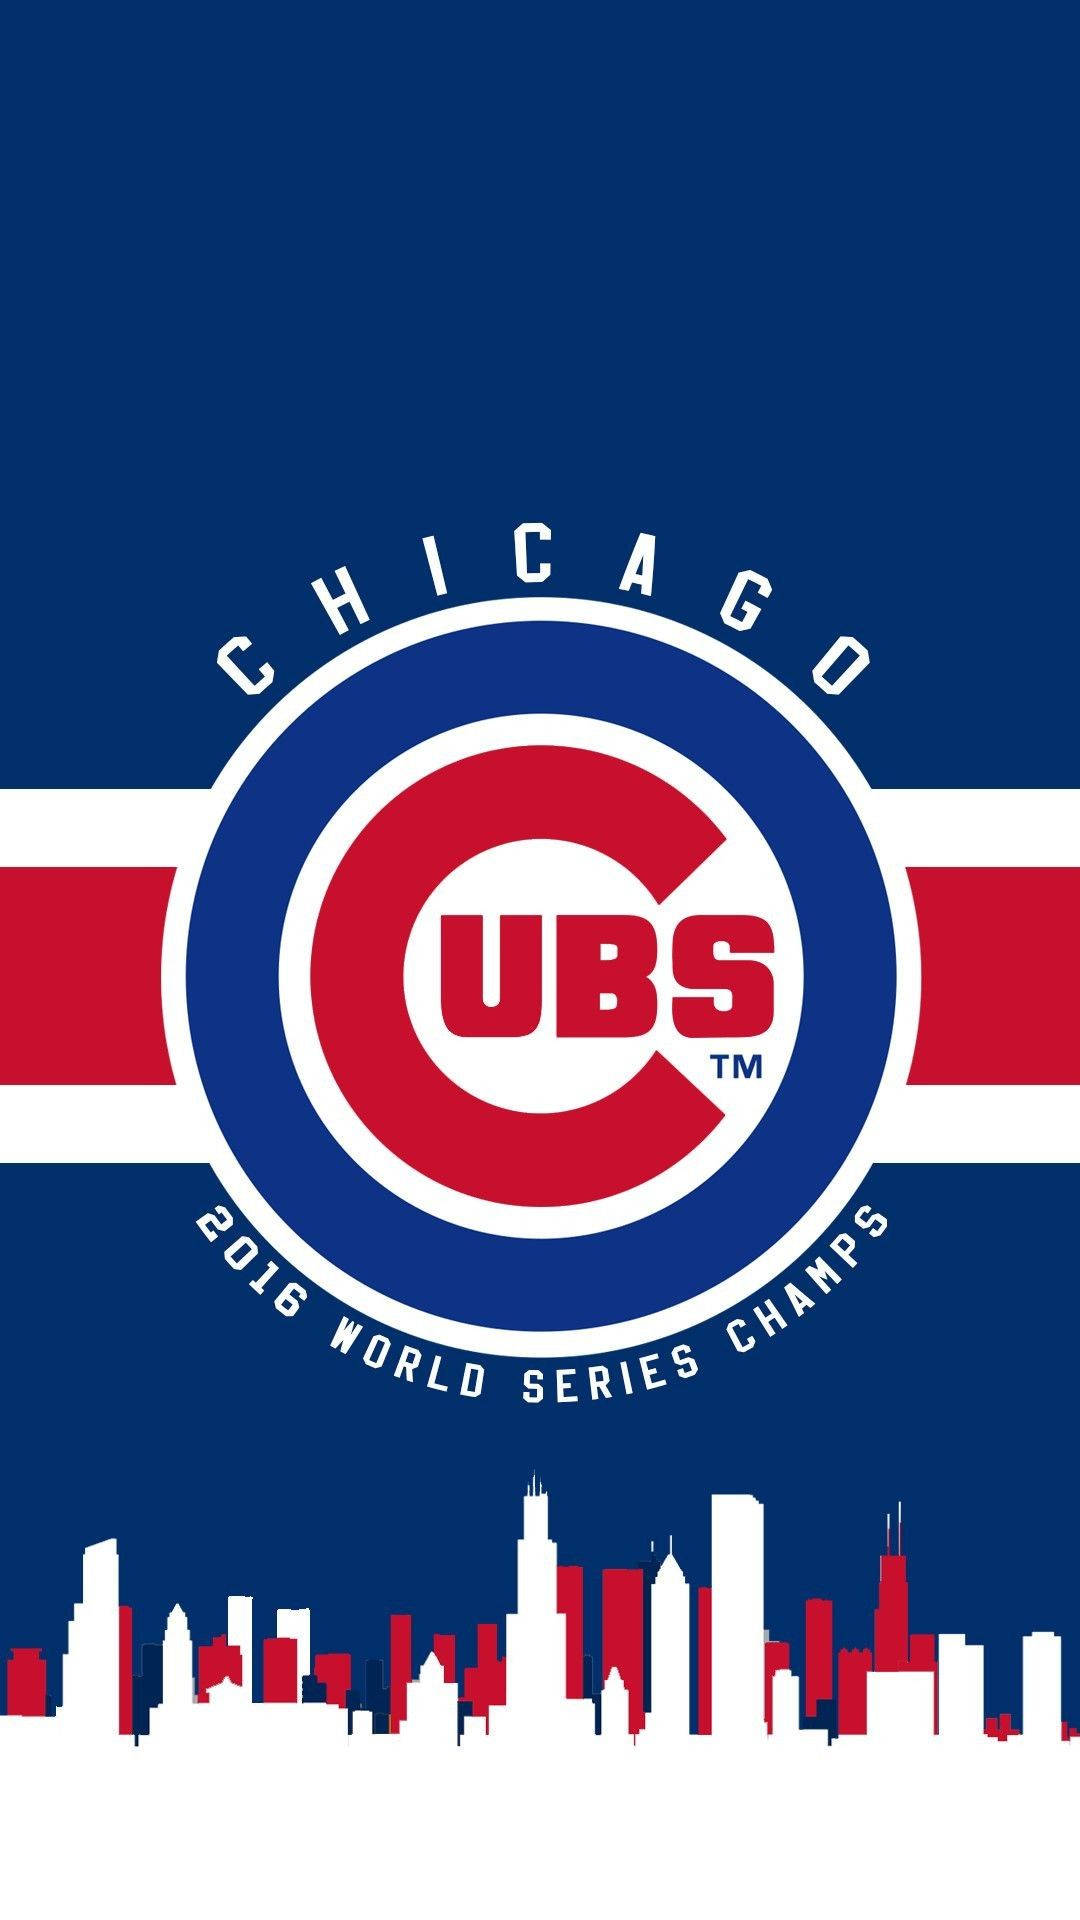 Cool Chicago Cubs Poster Wallpaper